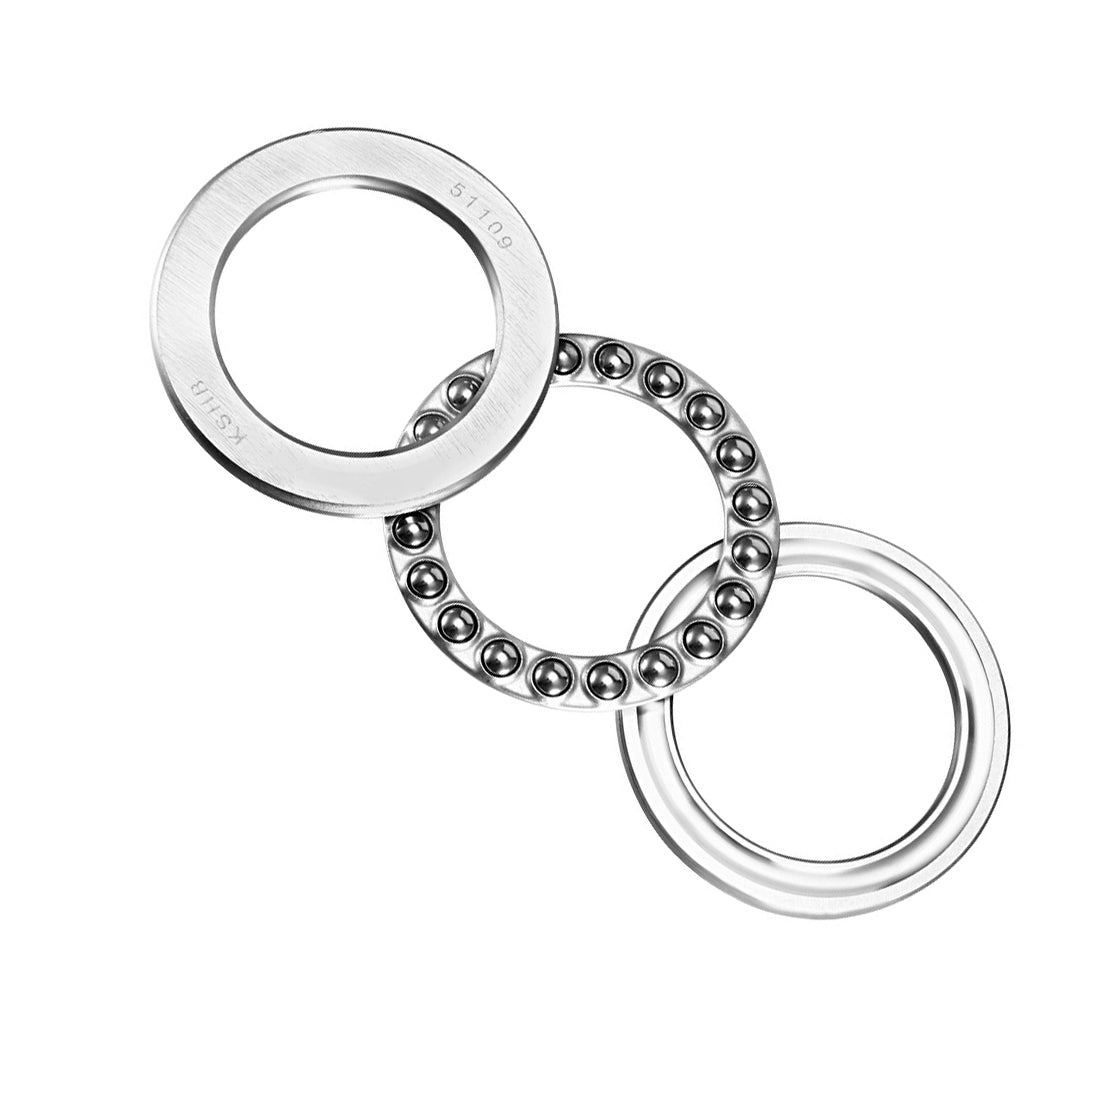 uxcell Uxcell 51109 Single Direction Thrust Ball Bearings 45mm x 65mm x 14mm Chrome Steel